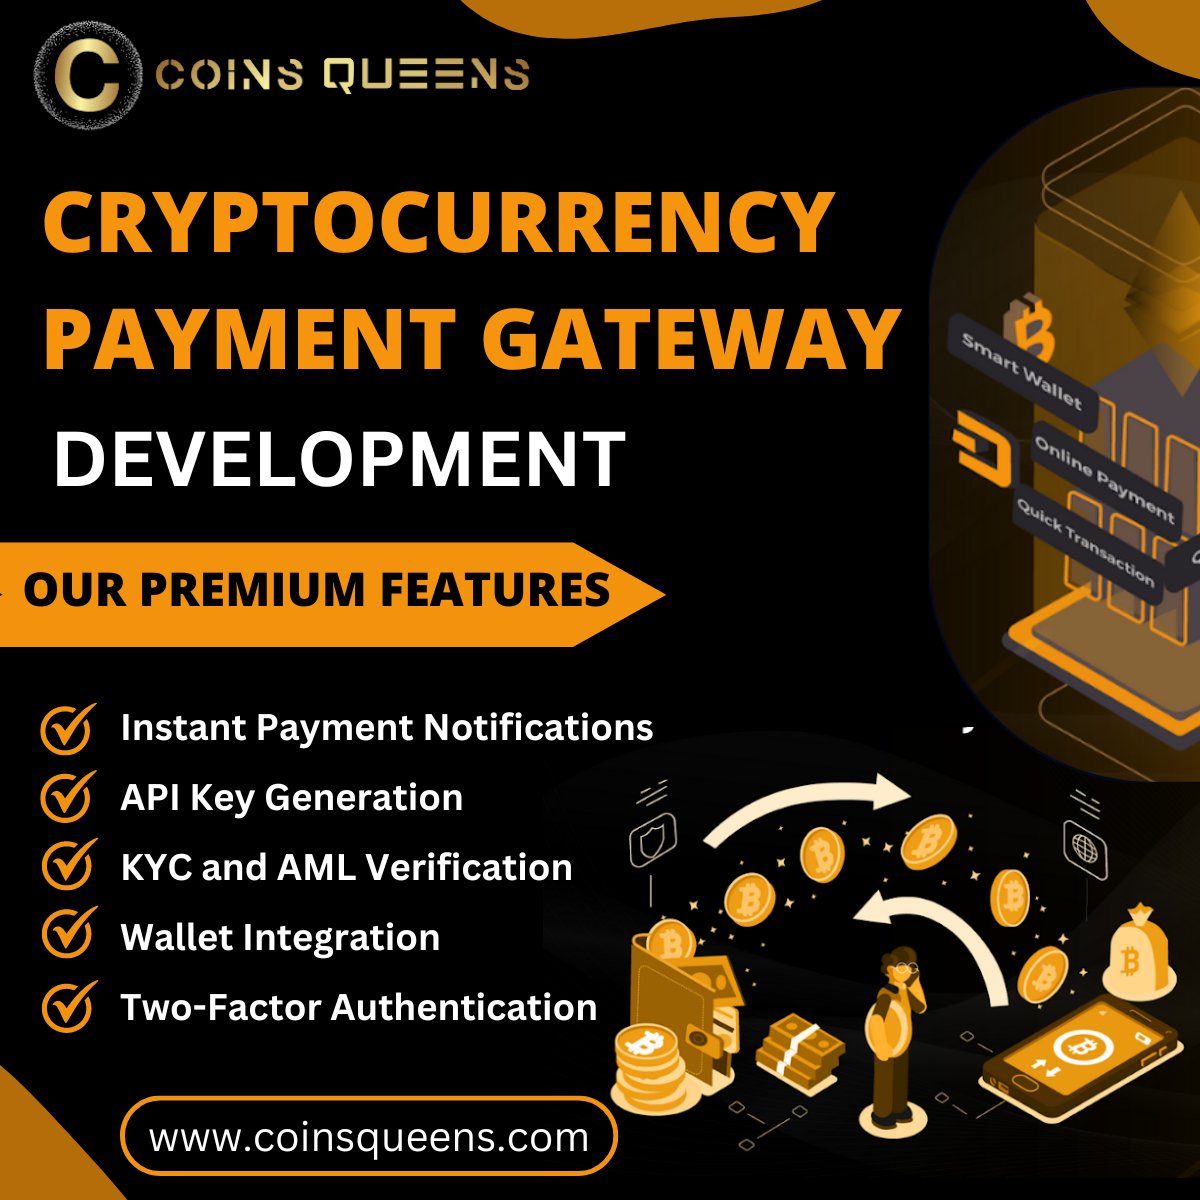 Stay ahead of the curve and embrace the future of payments with our cutting-edge cryptocurrency payment gateway solutions. 

Get ready to unlock new revenue streams and drive growth like never before!

For More Info >>> shorturl.at/kGST5

#CryptoPayments #Blockchain #Crypto